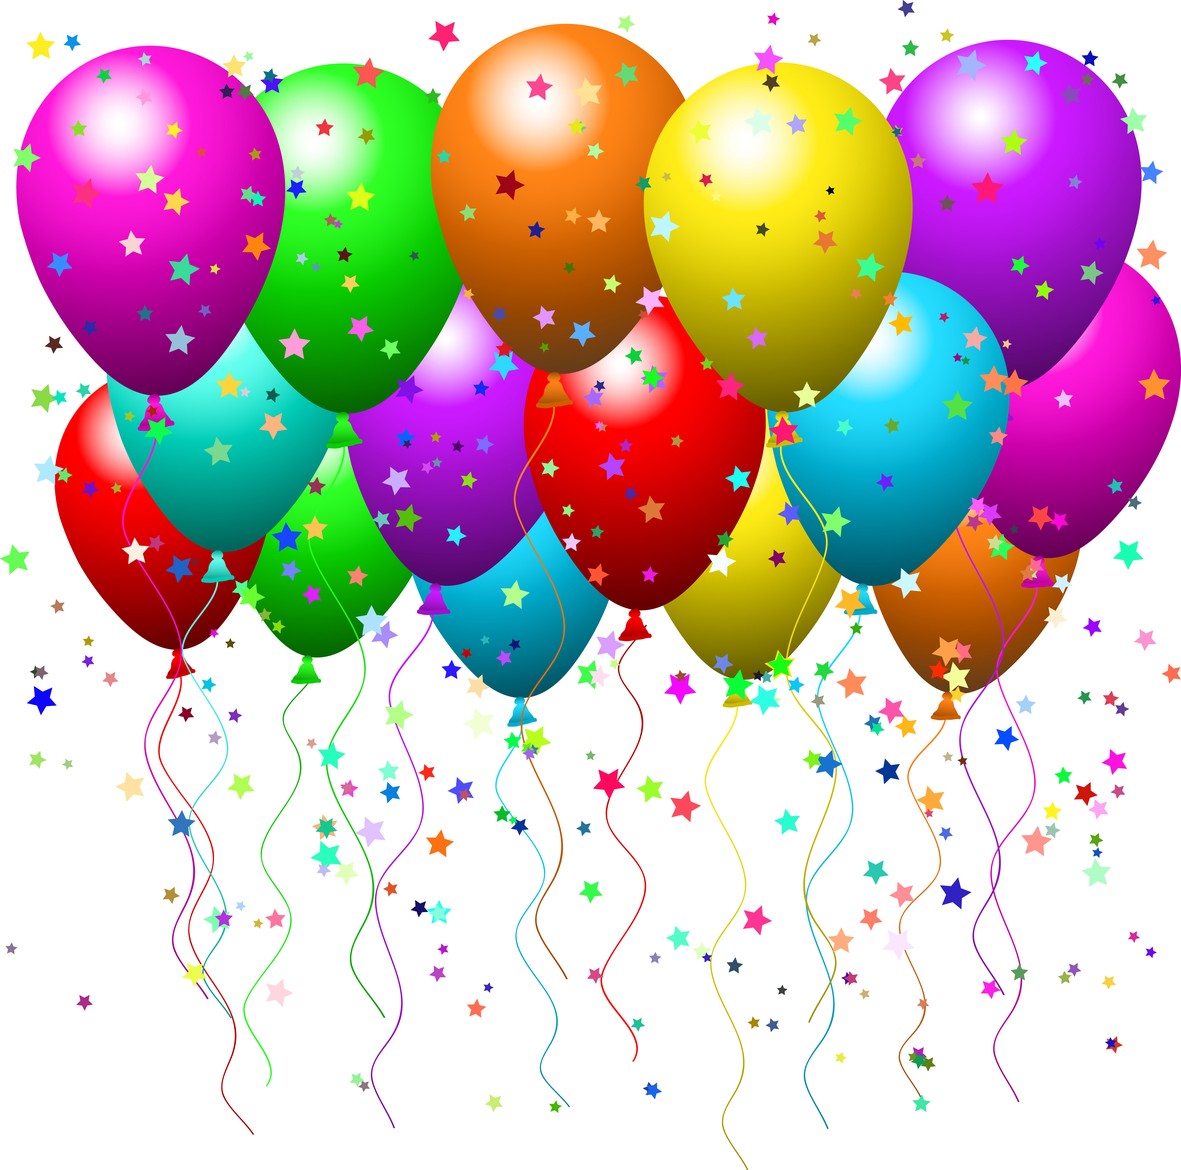 31 Birthday Balloon Png Free . Download:. Free clipart .